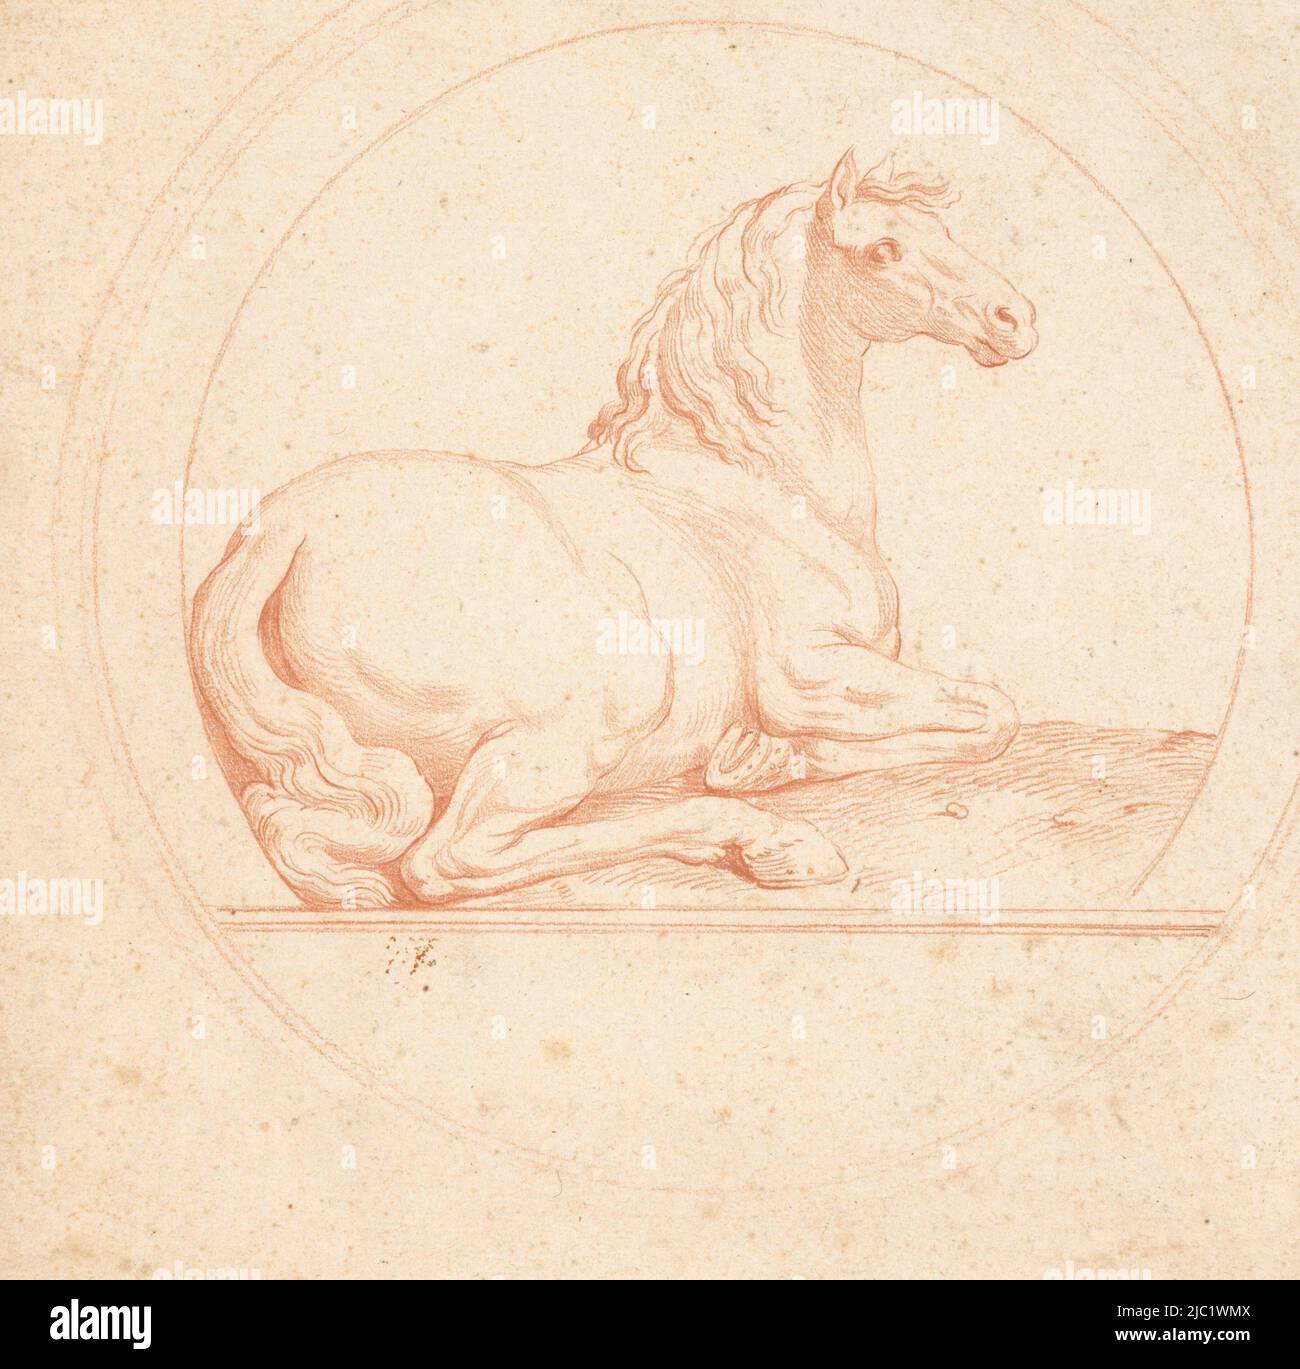 The drawing is the design for a medal issued in 1755 by the Ordinaire des Guerres., Reclining horse, design for a medal, draughtsman: Edme Bouchardon, (mentioned on object), Paris, 1755, paper, h 228 mm × w 284 mm, d 210 mm Stock Photo